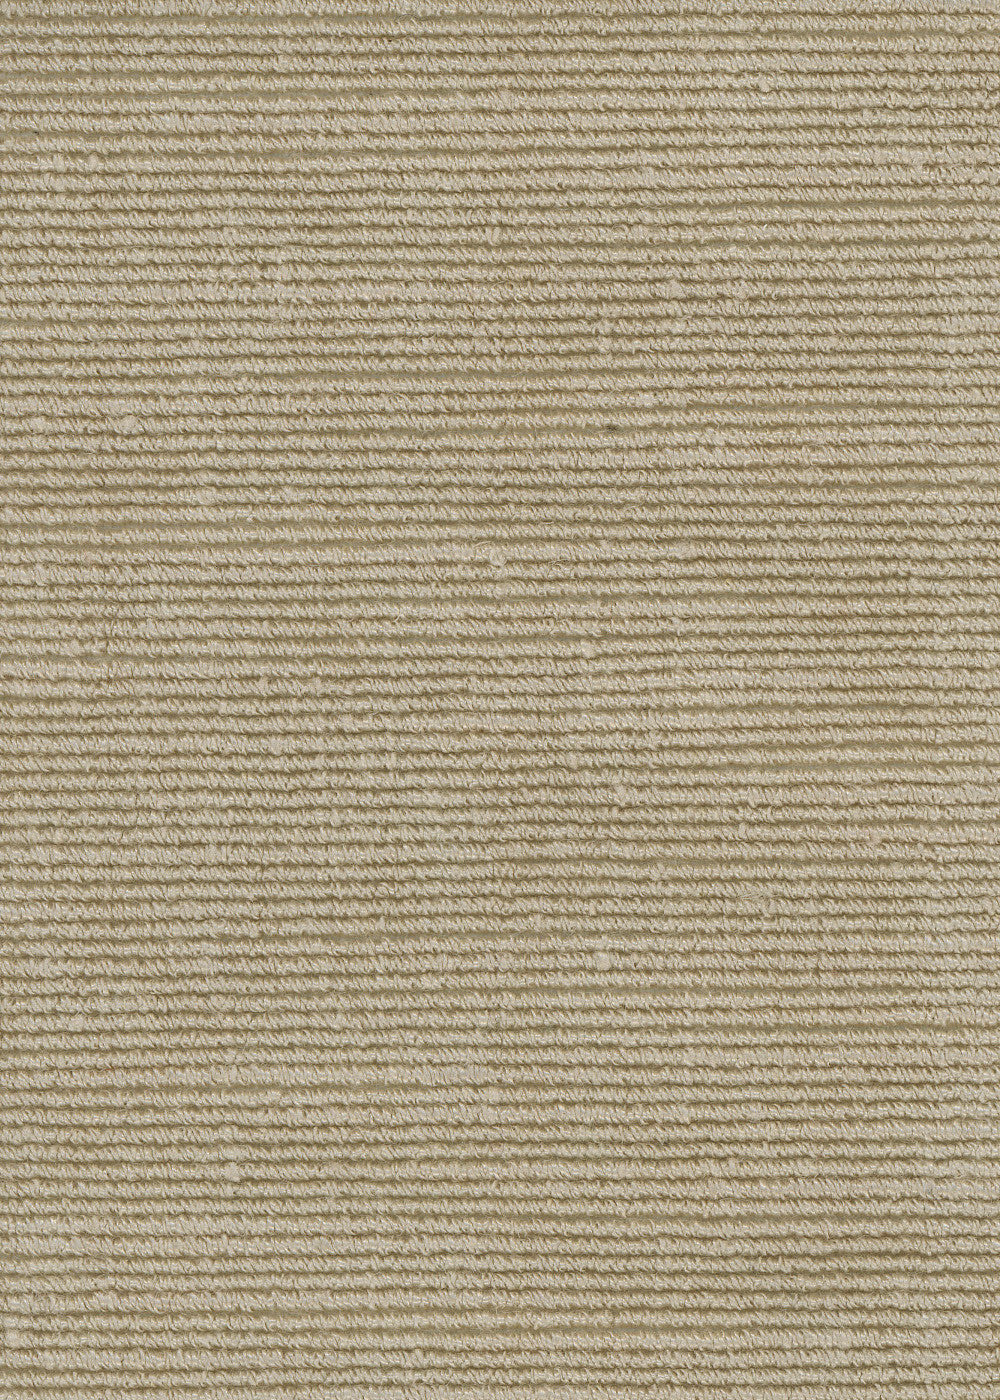 beige fabric with a horizontal ribbed weave